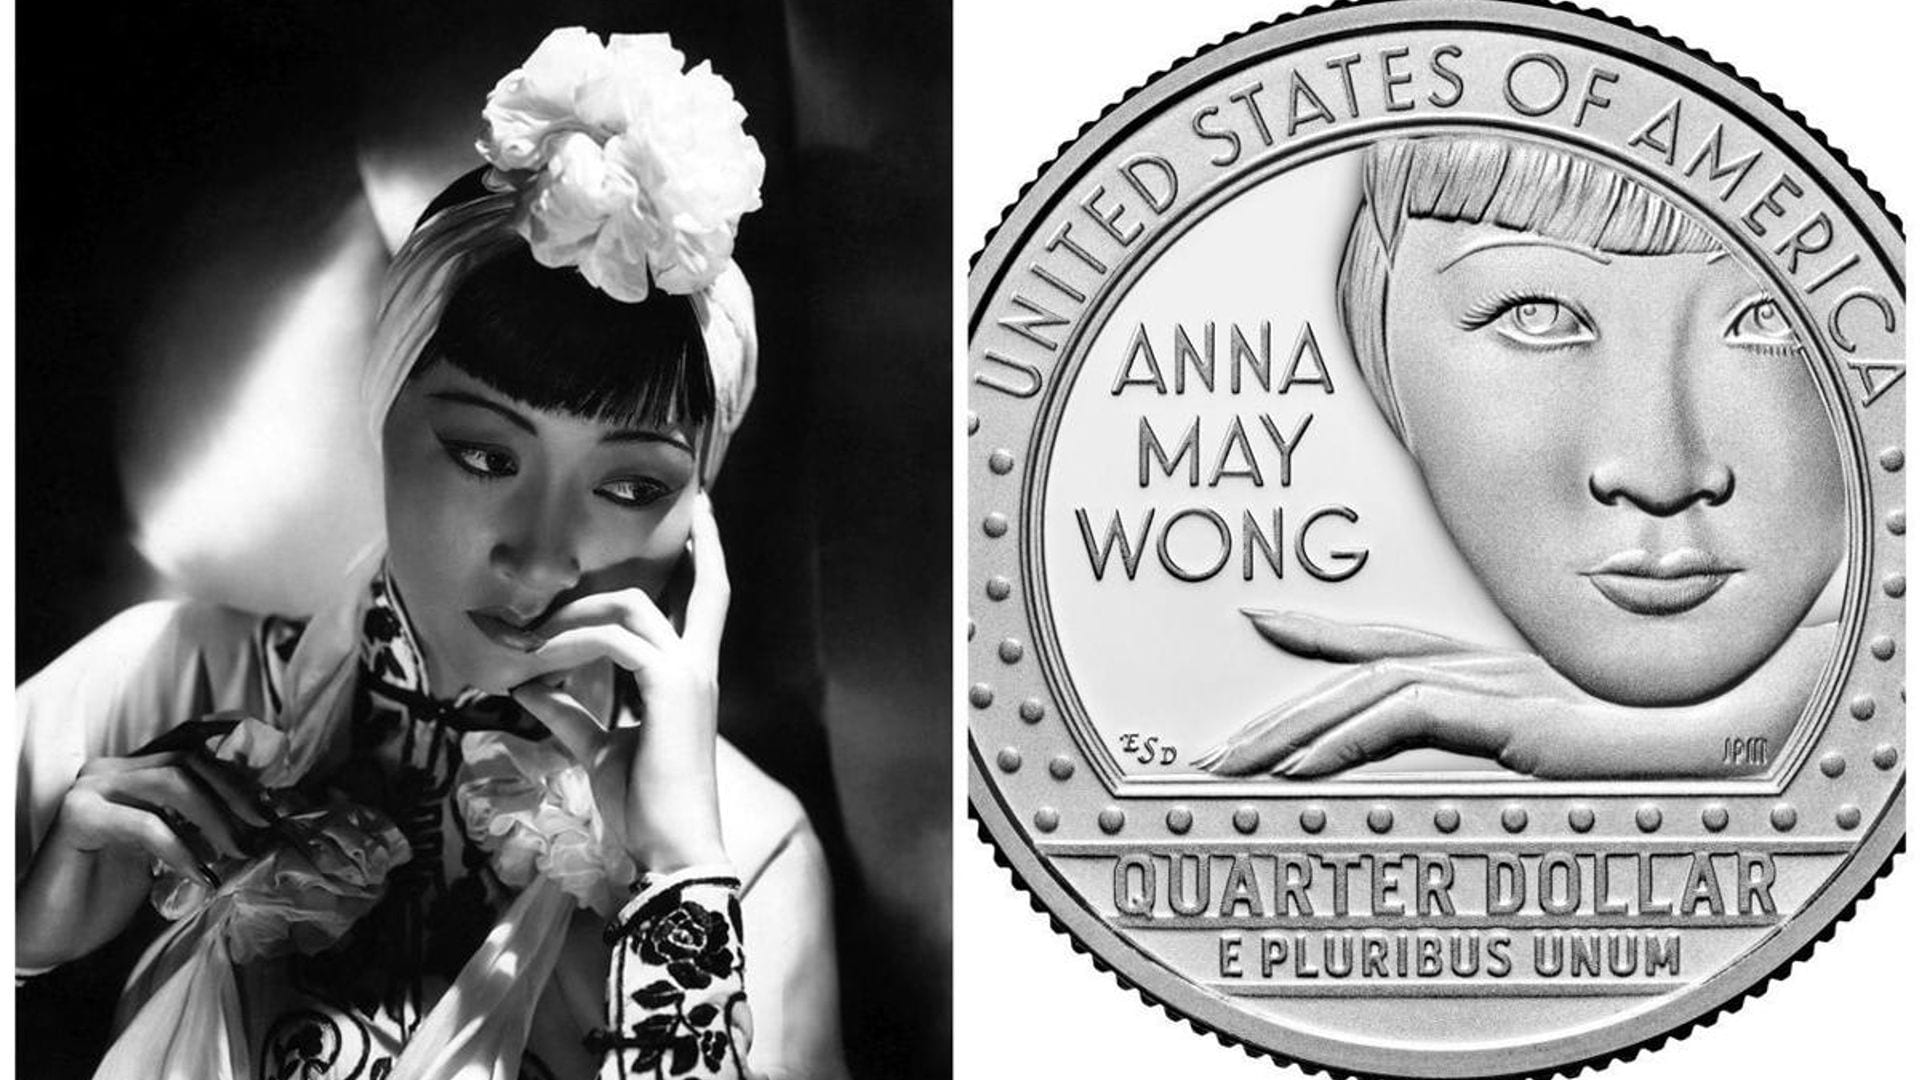 Who is Anna May Wong? The late actress will become the first Asian American to appear on U.S currency